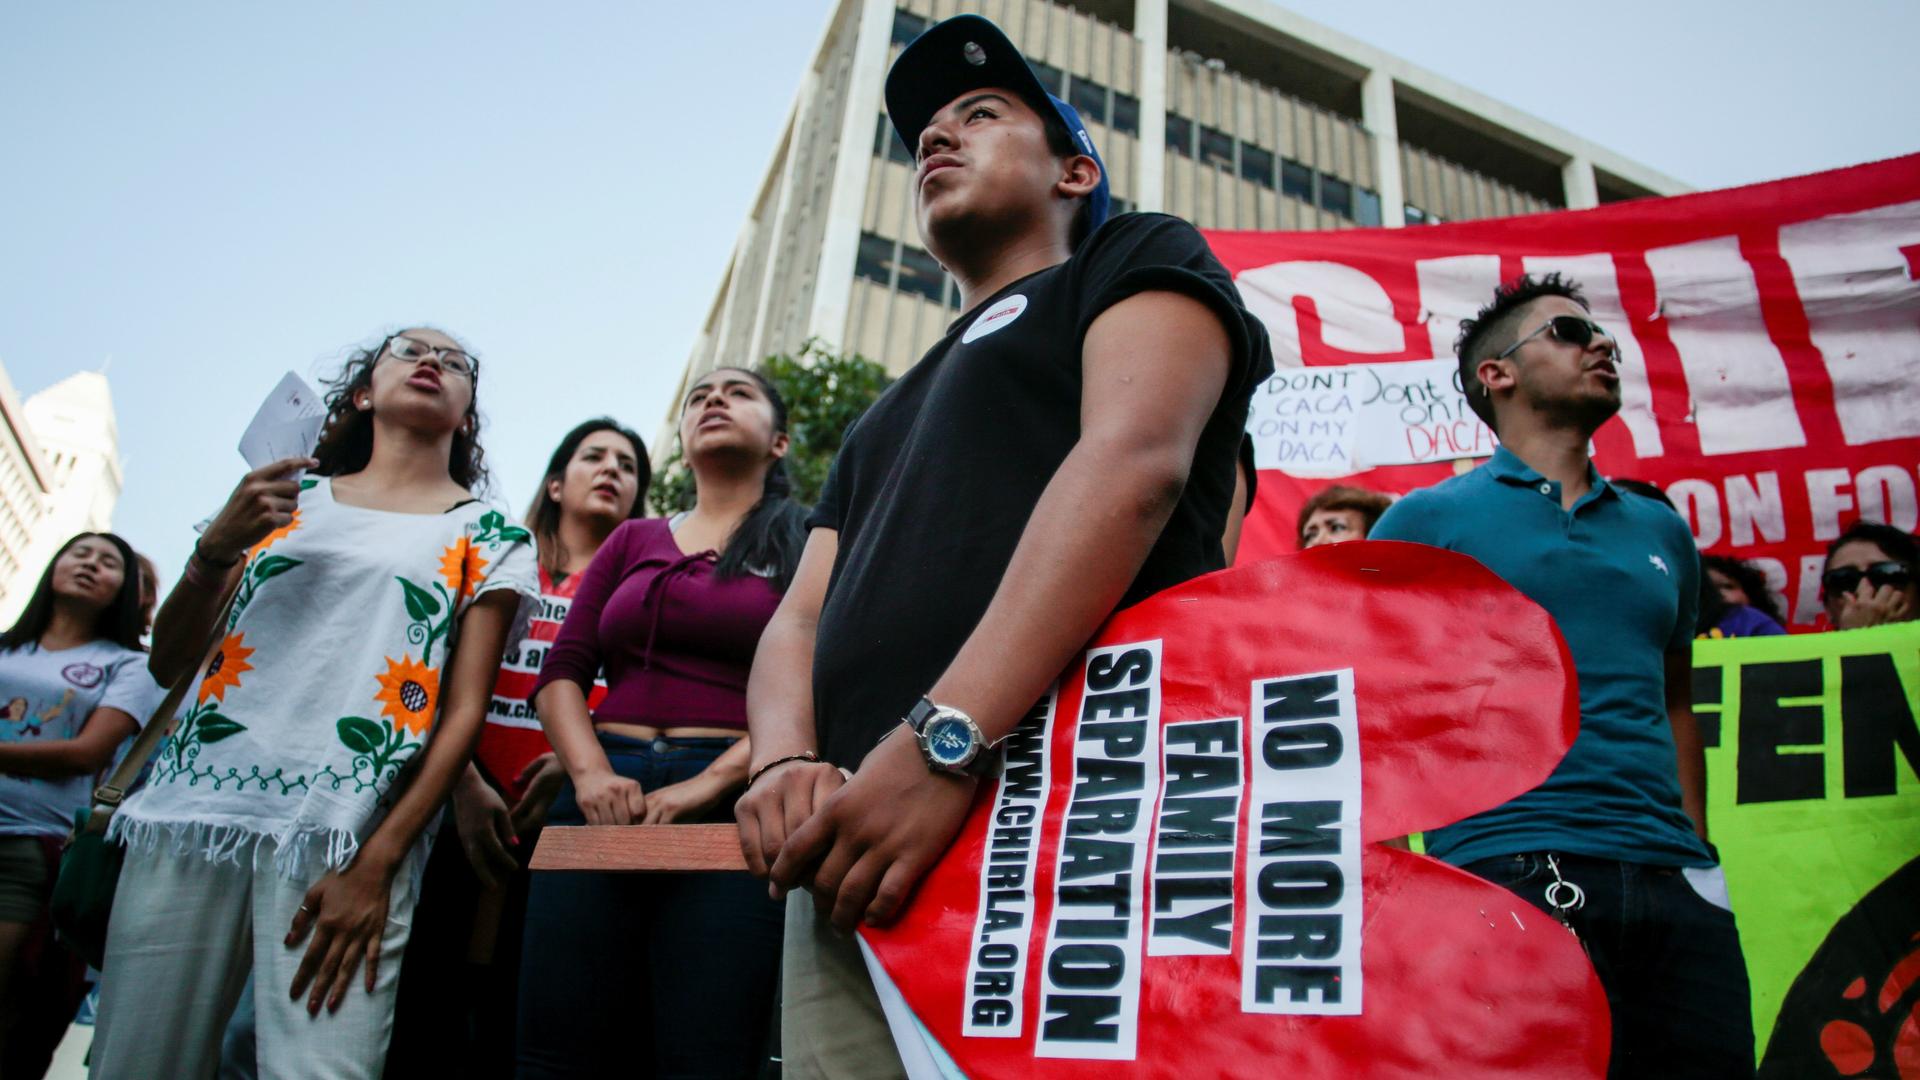 Axel, 15, the son of a Deferred Action for Childhood Arrivals (DACA) program recipient, stands with supporters during a rally outside the Federal Building in Los Angeles, California, U.S., September 1, 2017.